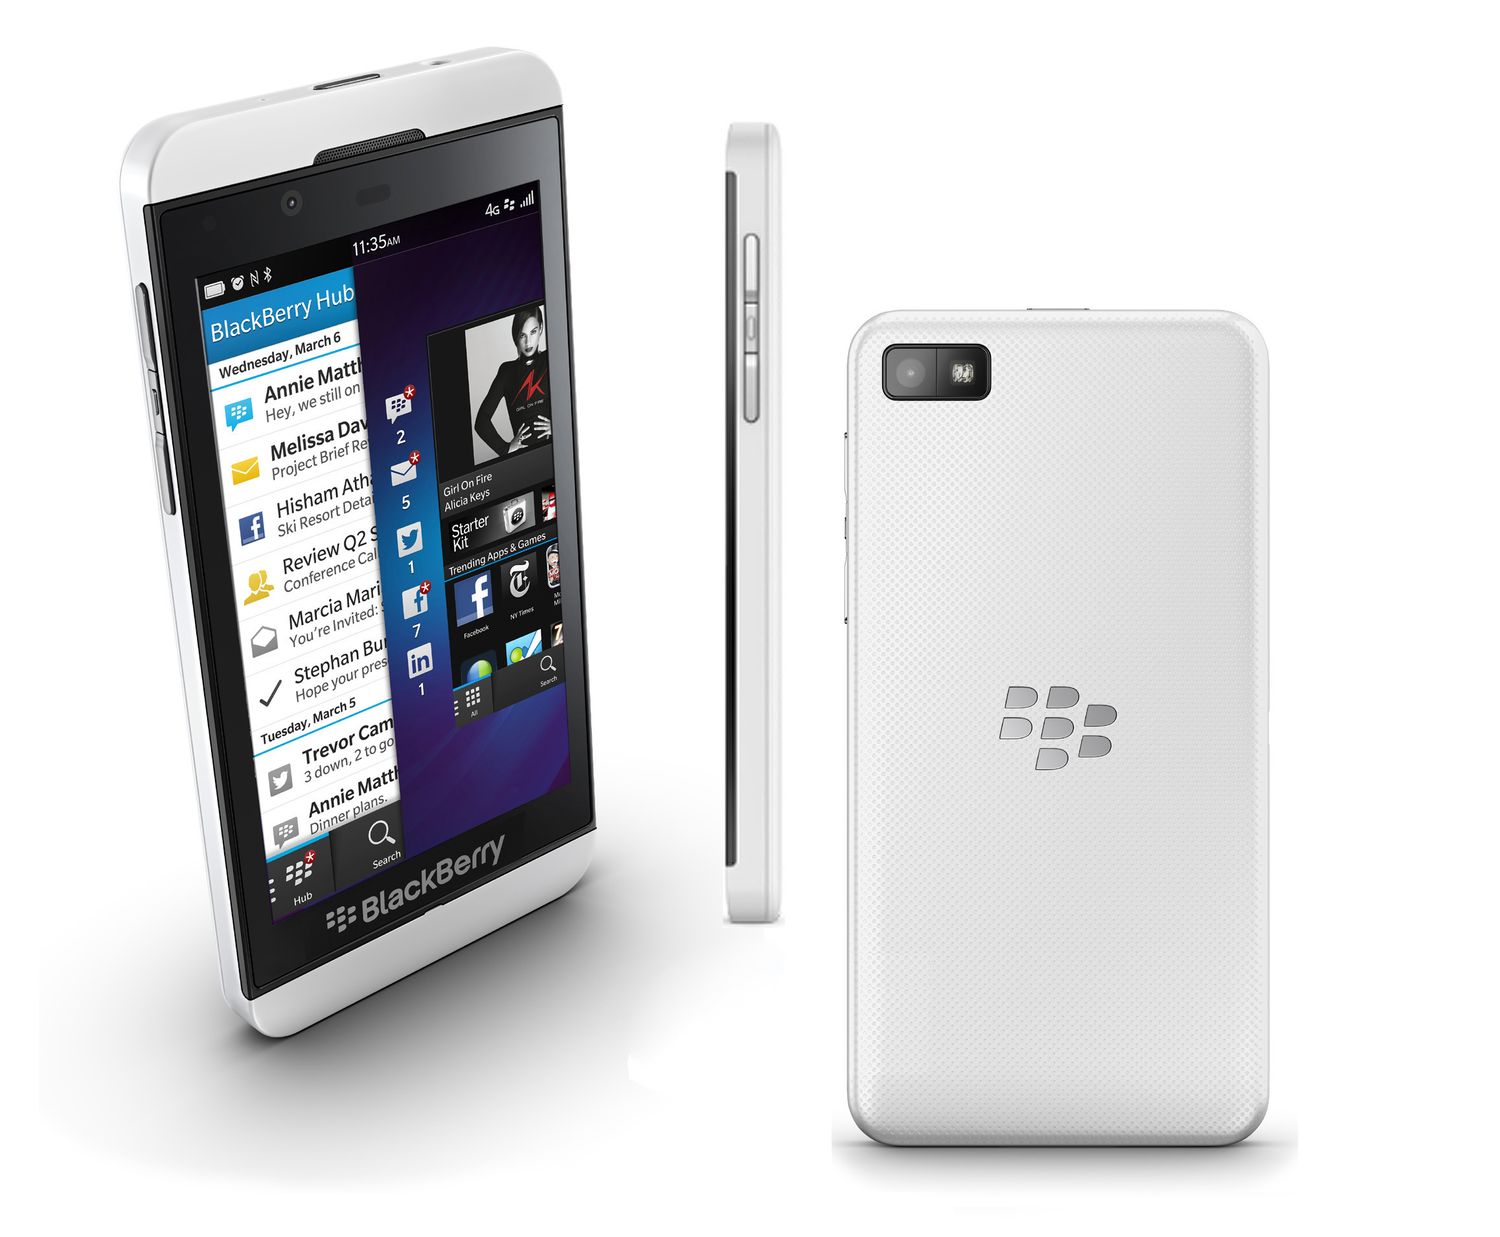 blackberry-z10-is-now-available-on-att-and-through-best-buy